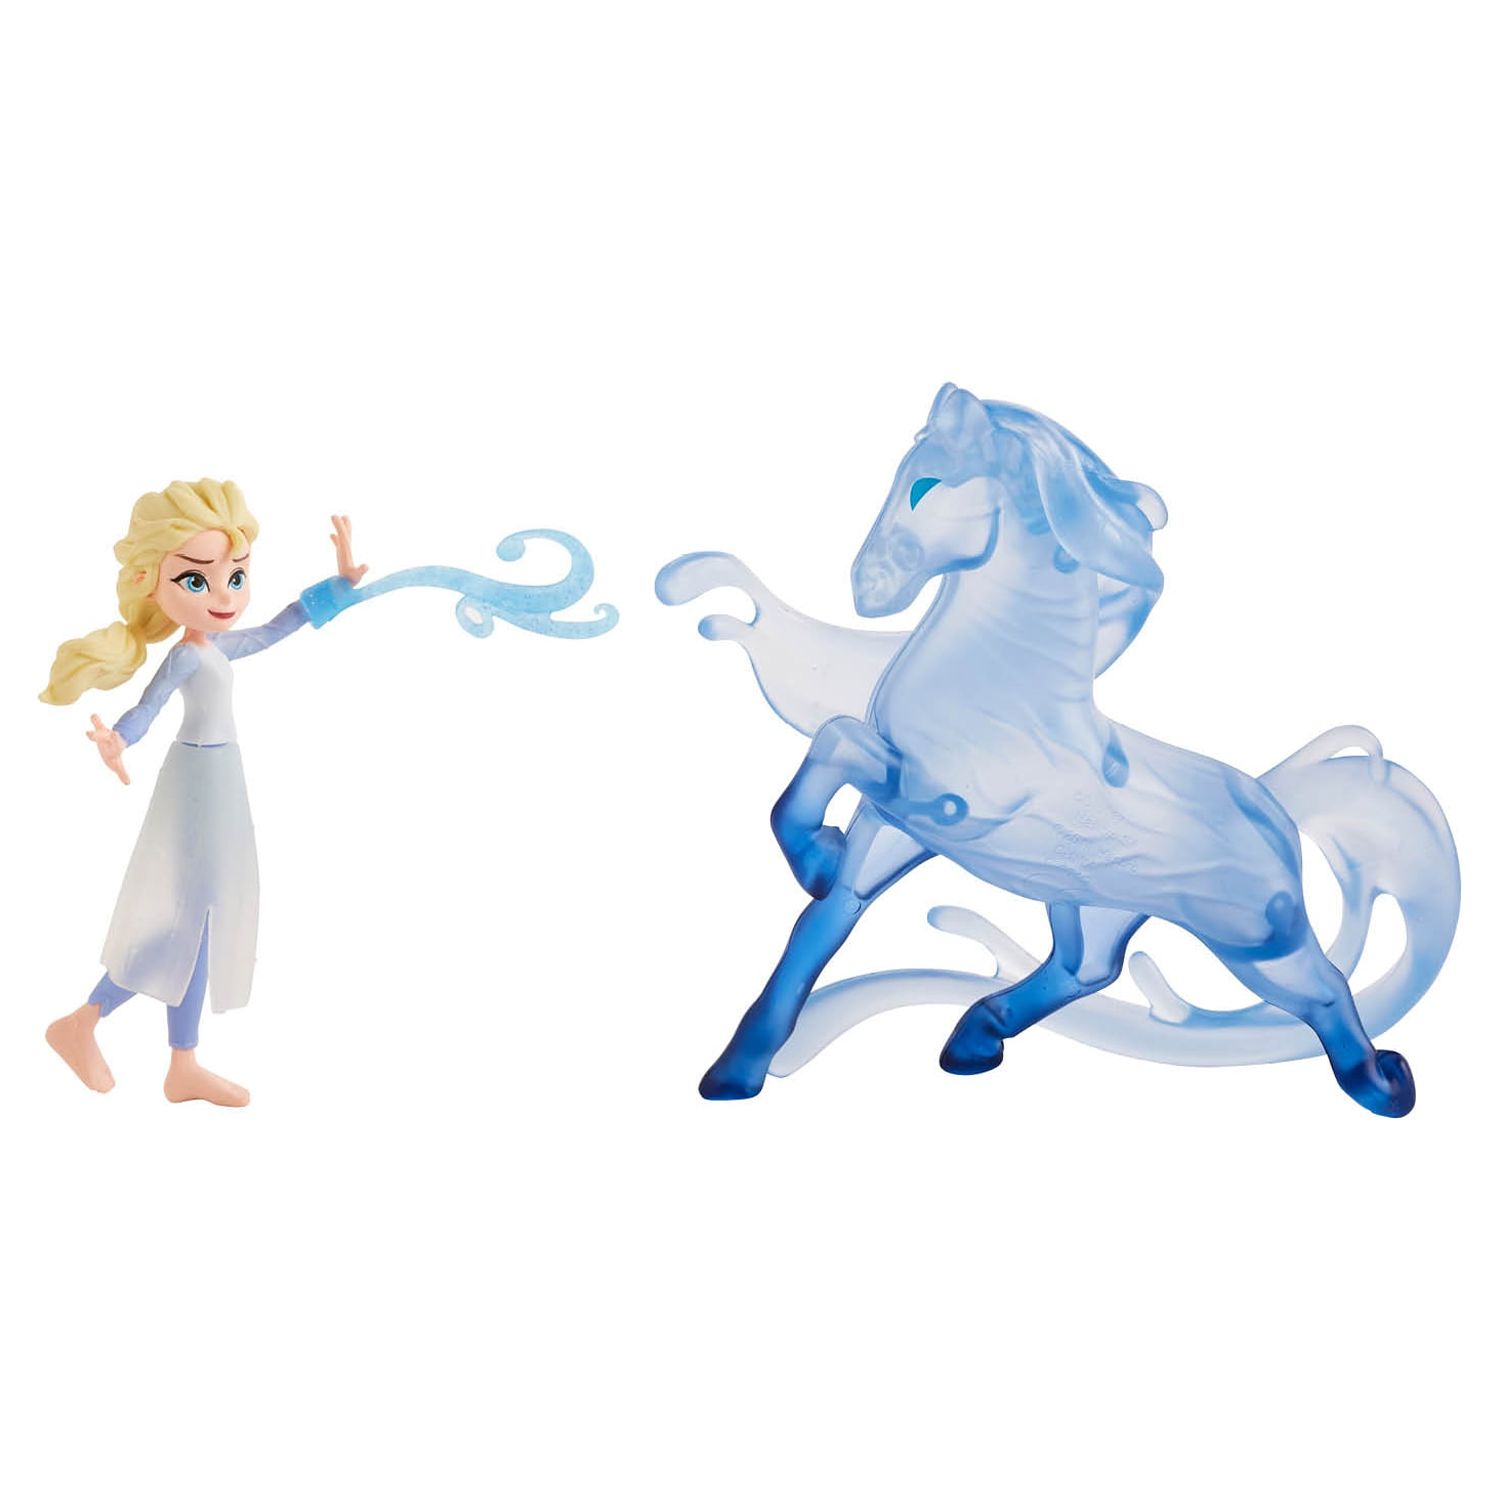 Disney Frozen 2 Elsa and the Nokk Small Doll Playset, Includes Doll and Nokk Figure - image 1 of 8